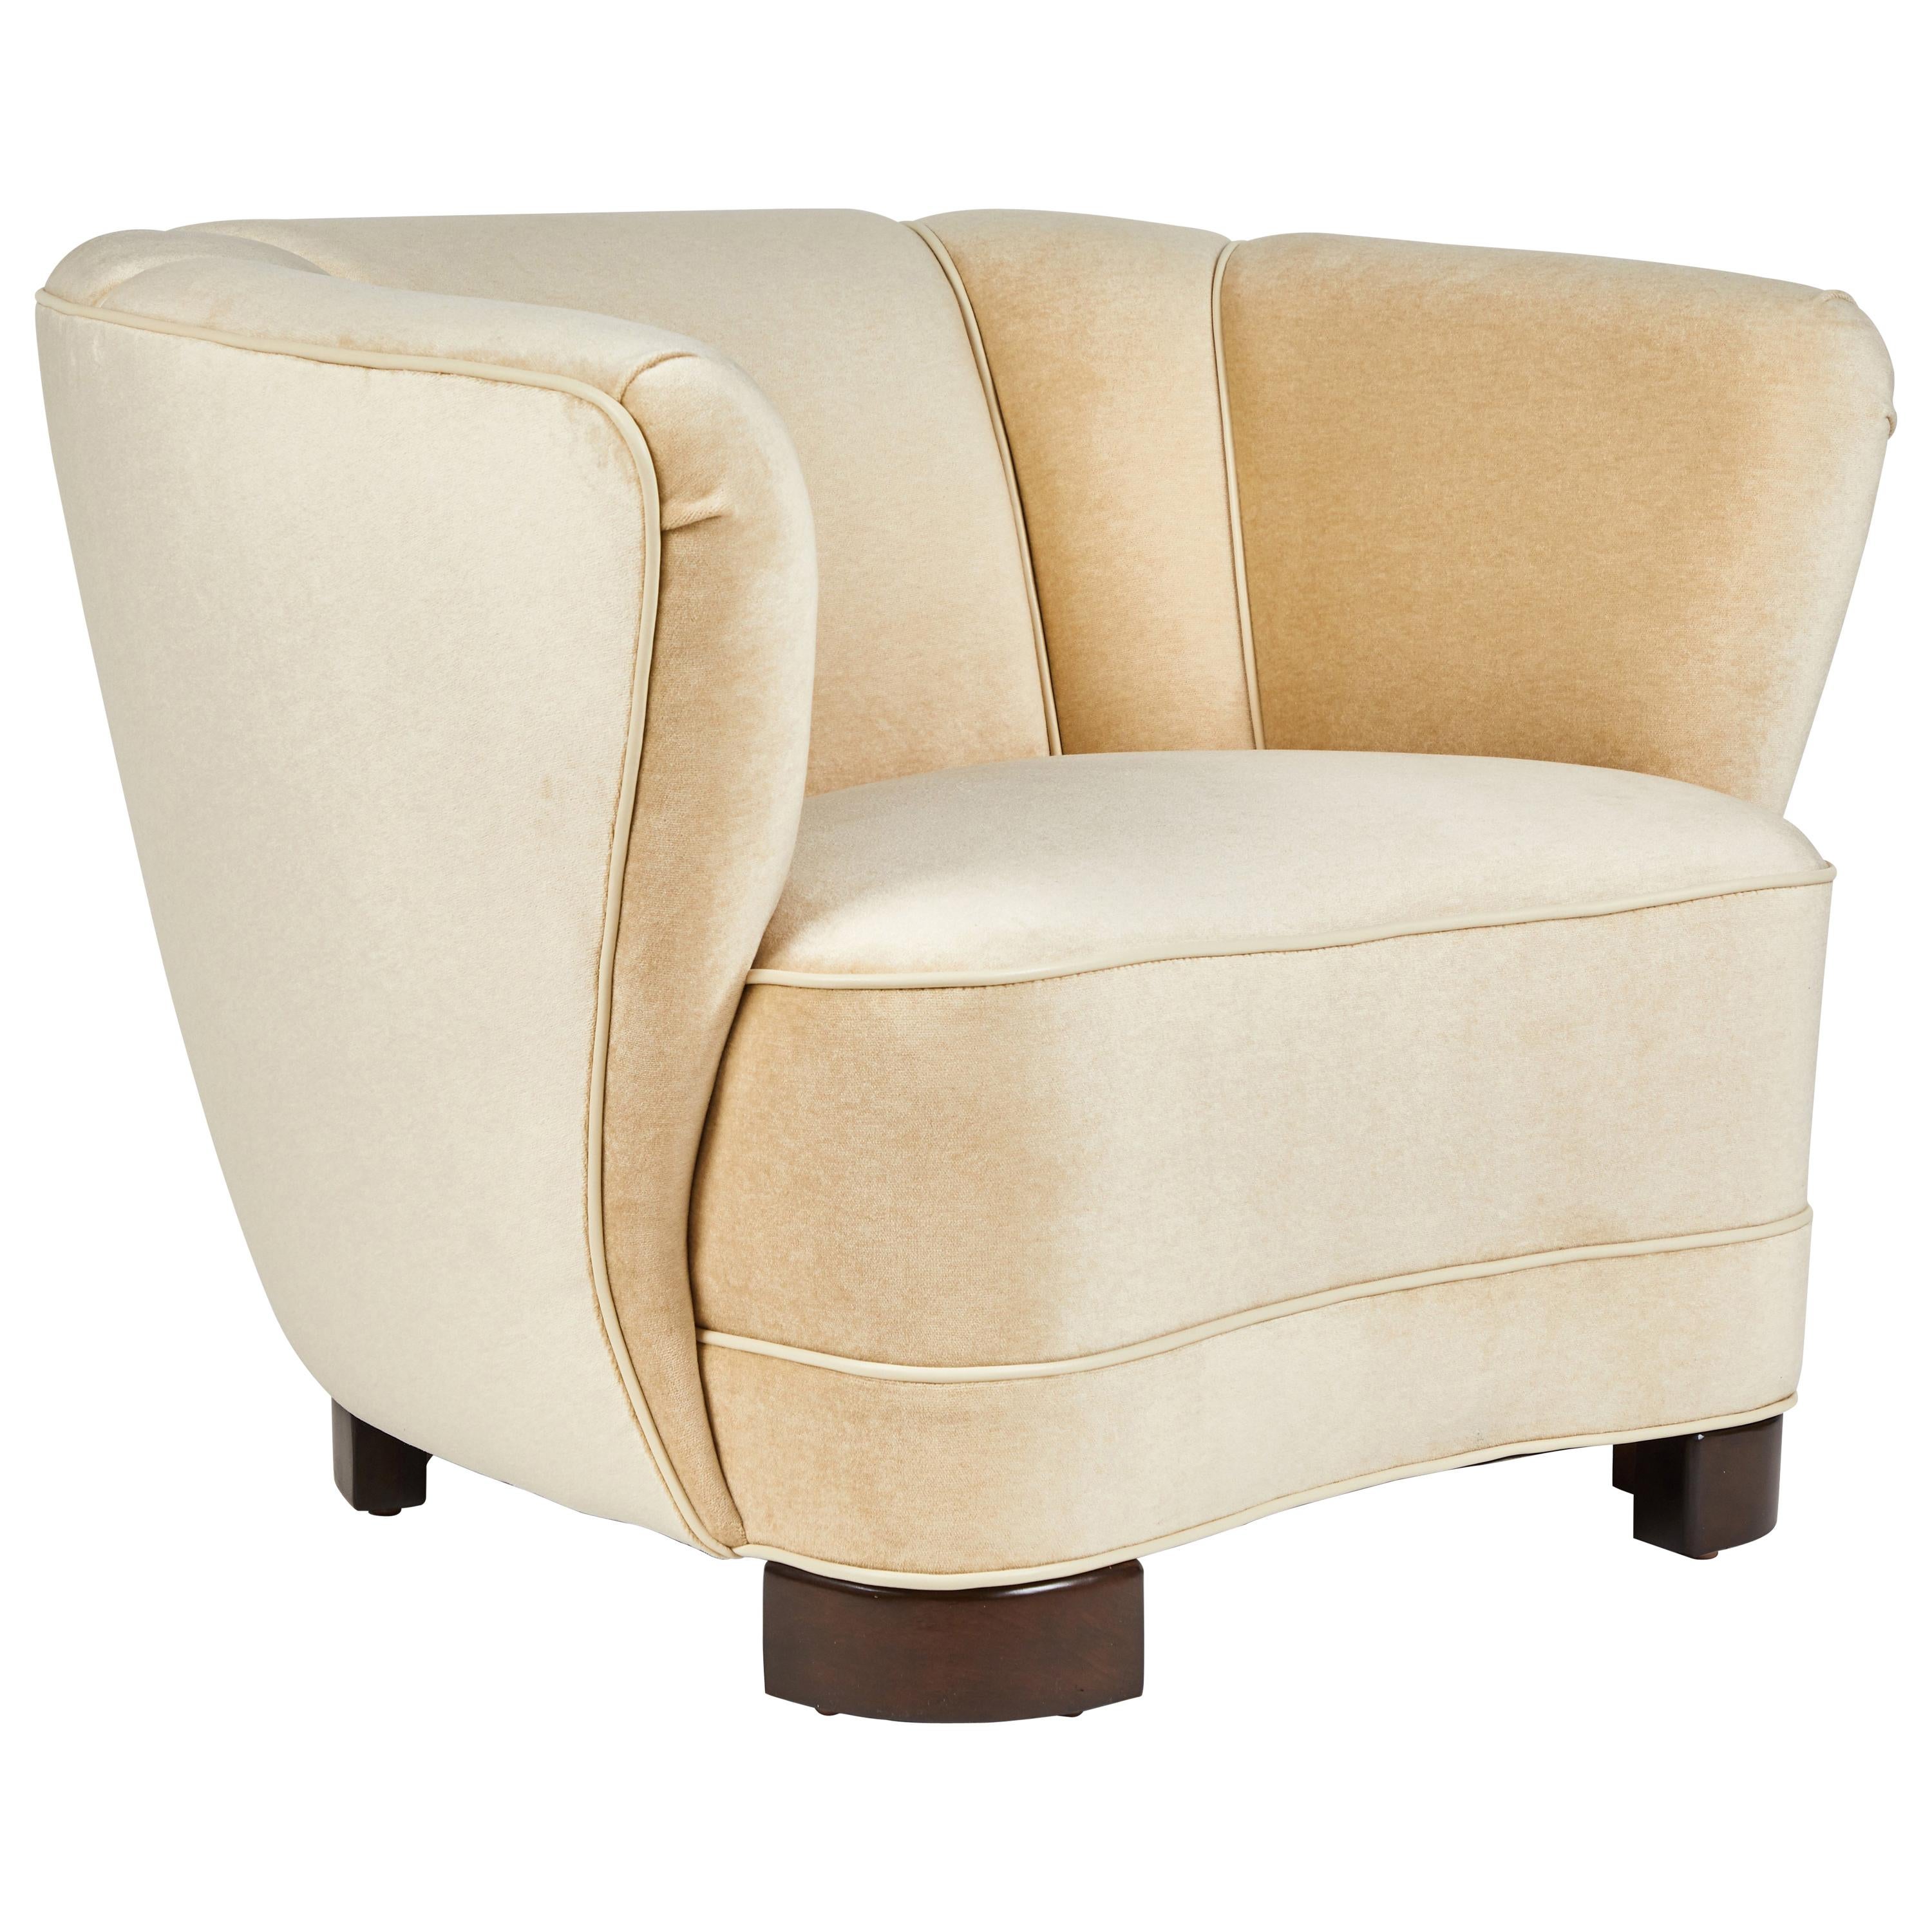 Sutton Place Club Chair by Dragonette Private Label